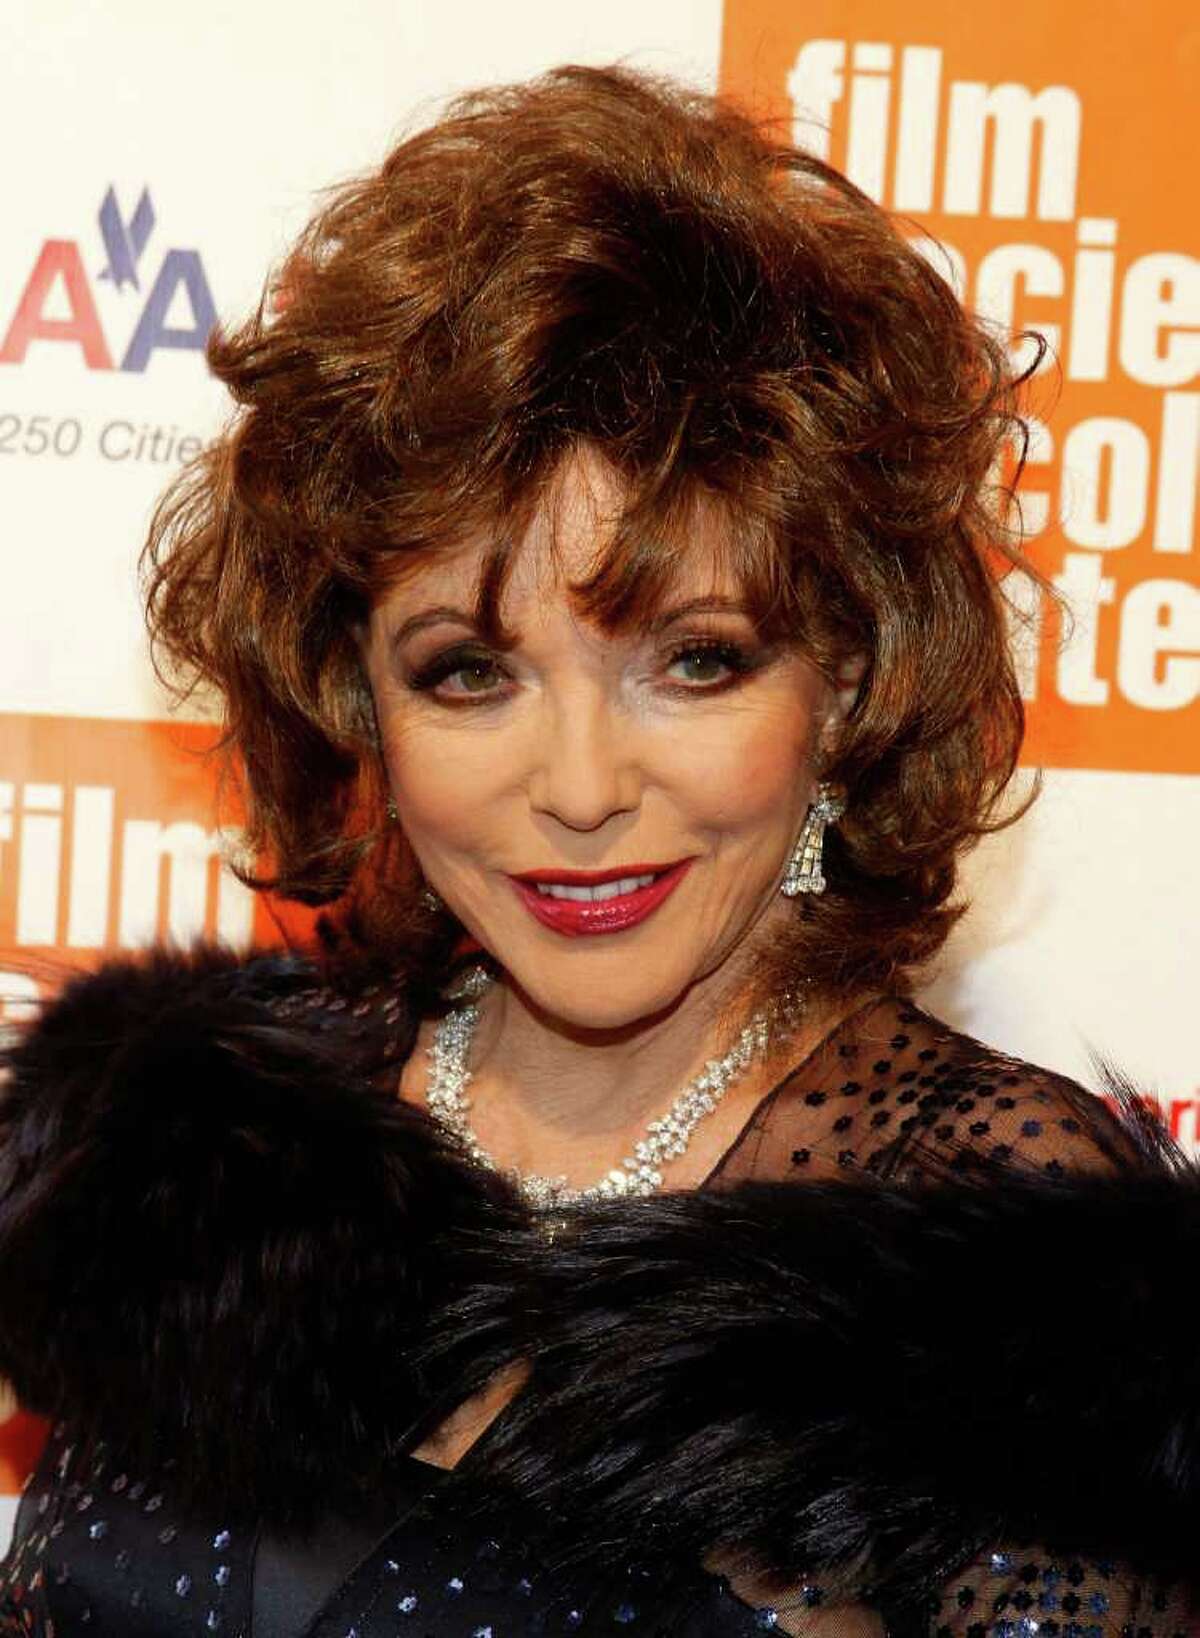 NEW YORK, NY - MAY 02: Actress Joan Collins attends The Film Society of Lincoln Center's presentation of the 38th Annual Chaplin Award at Alice Tully Hall on May 2, 2011 in New York City. (Photo by Mark Von Holden/Getty Images) *** Local Caption *** Joan Collins;